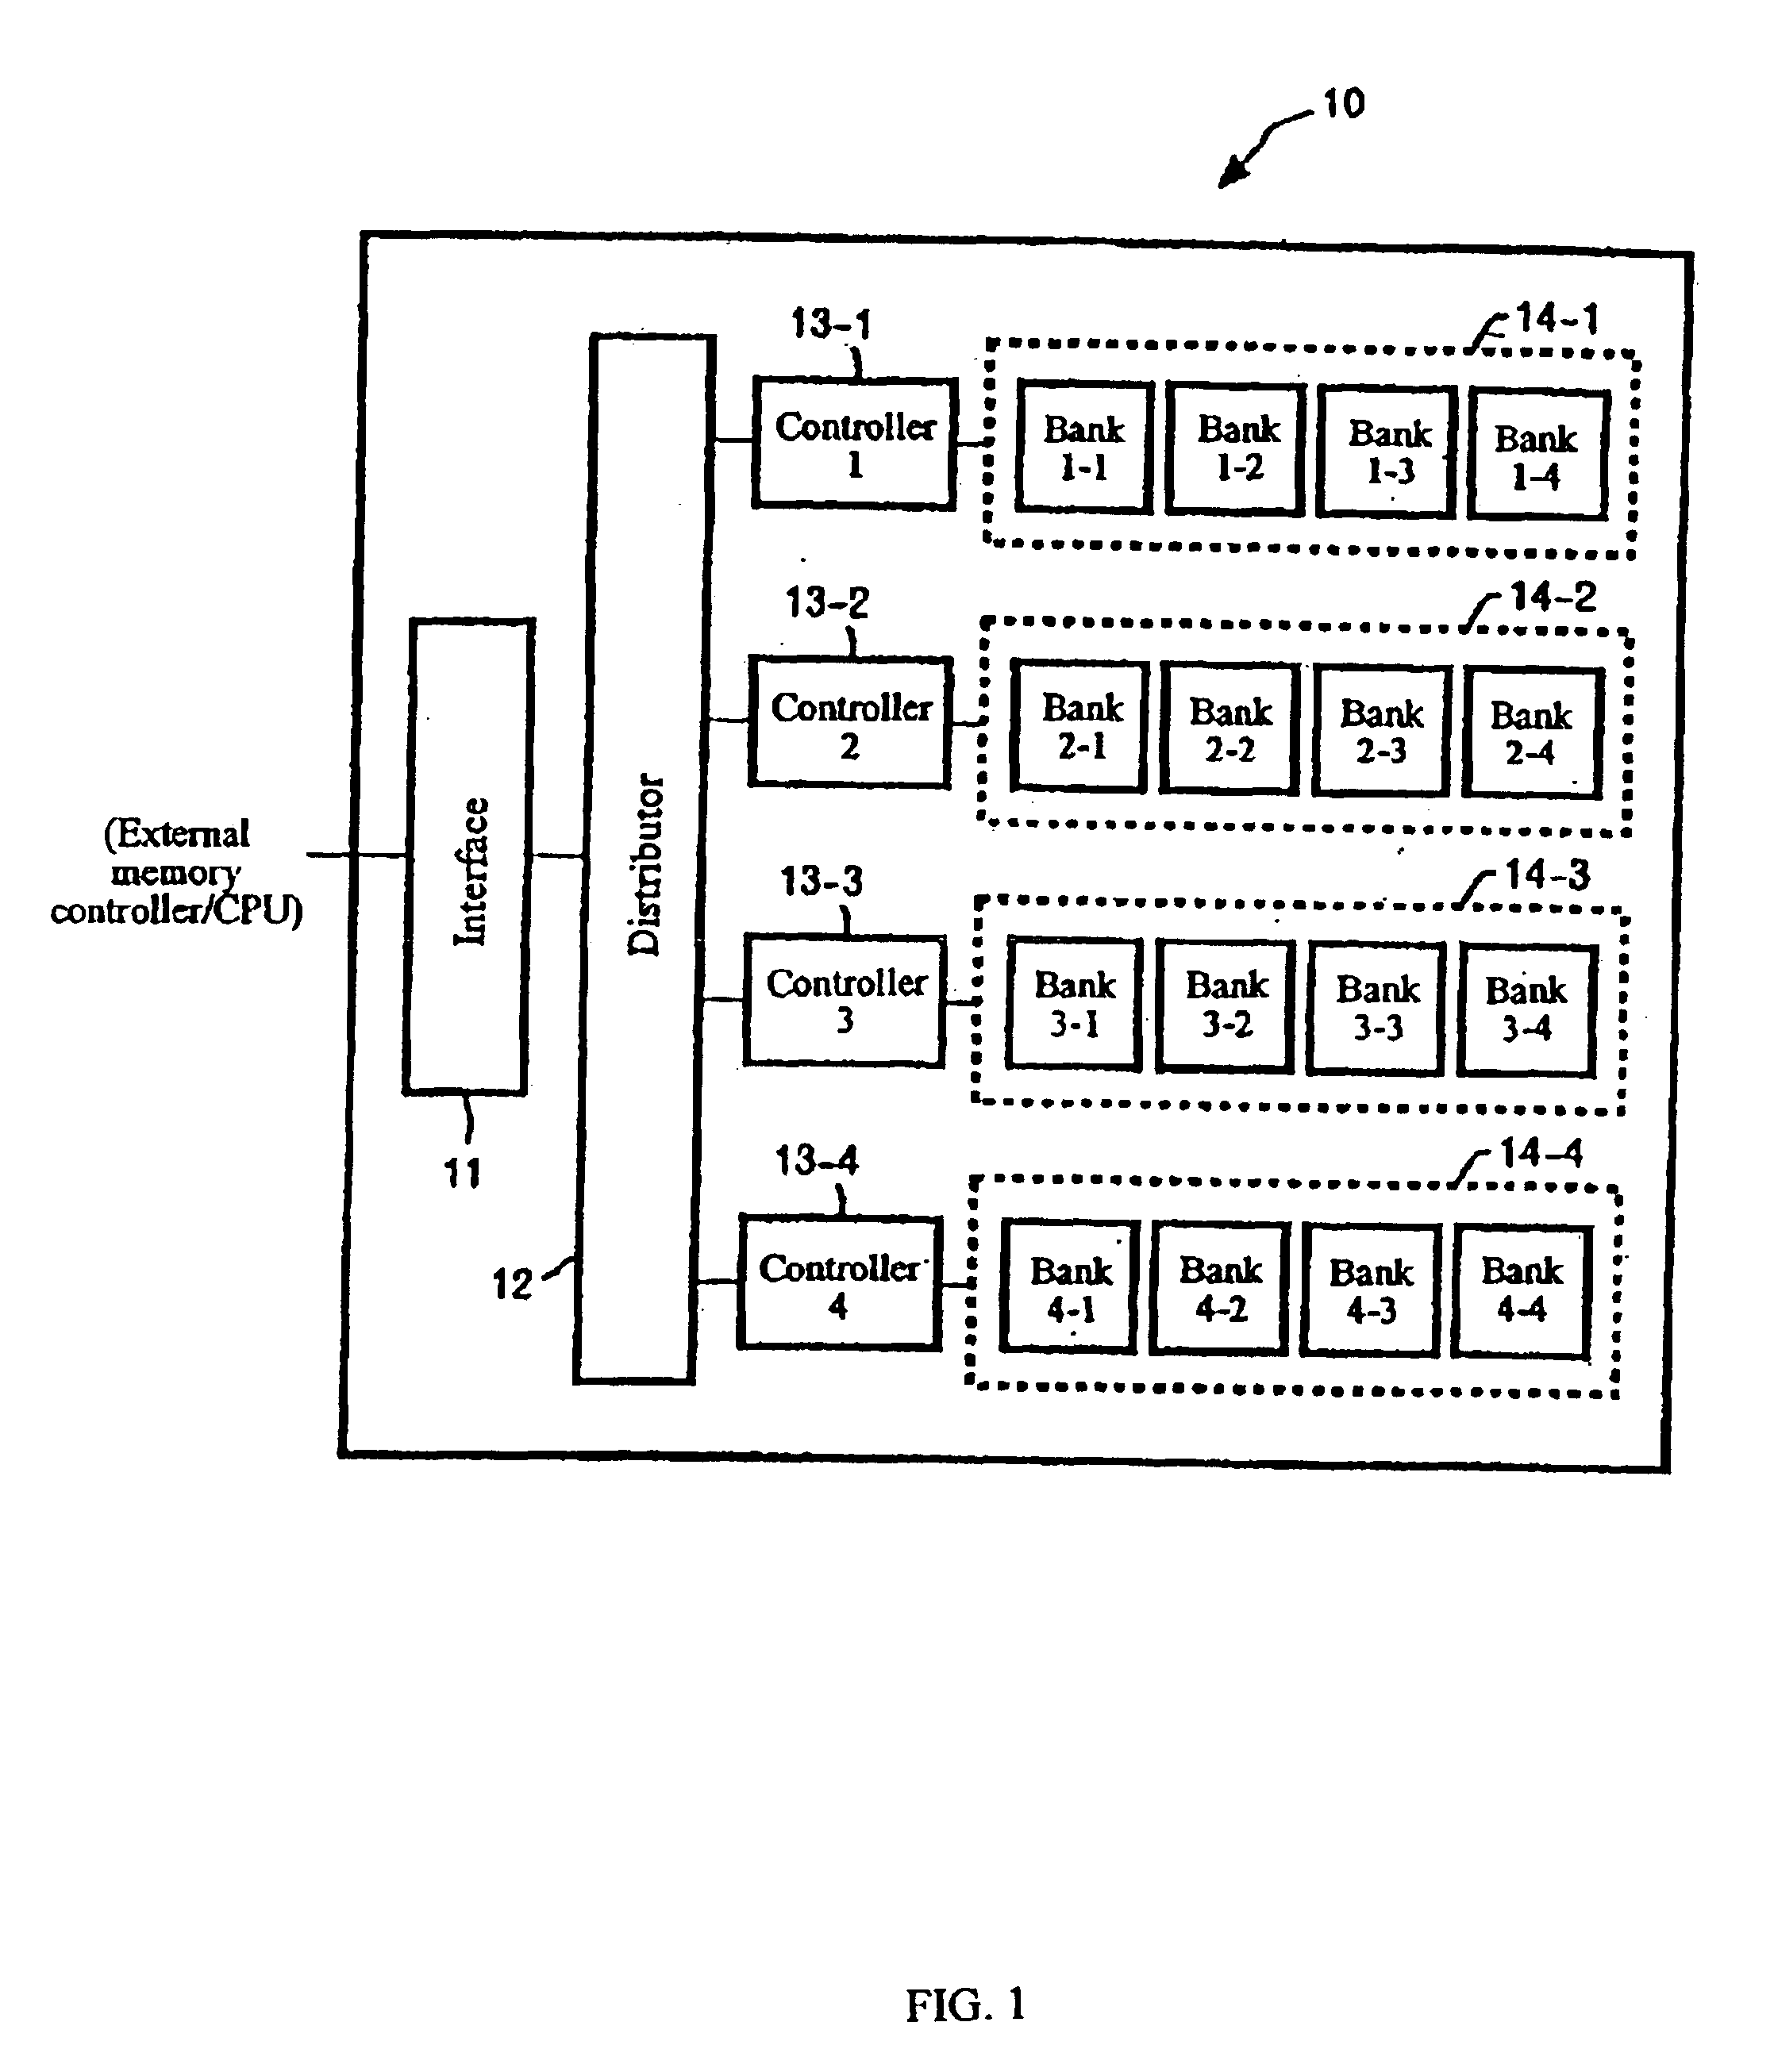 Search memory, memory search controller, and memory search method